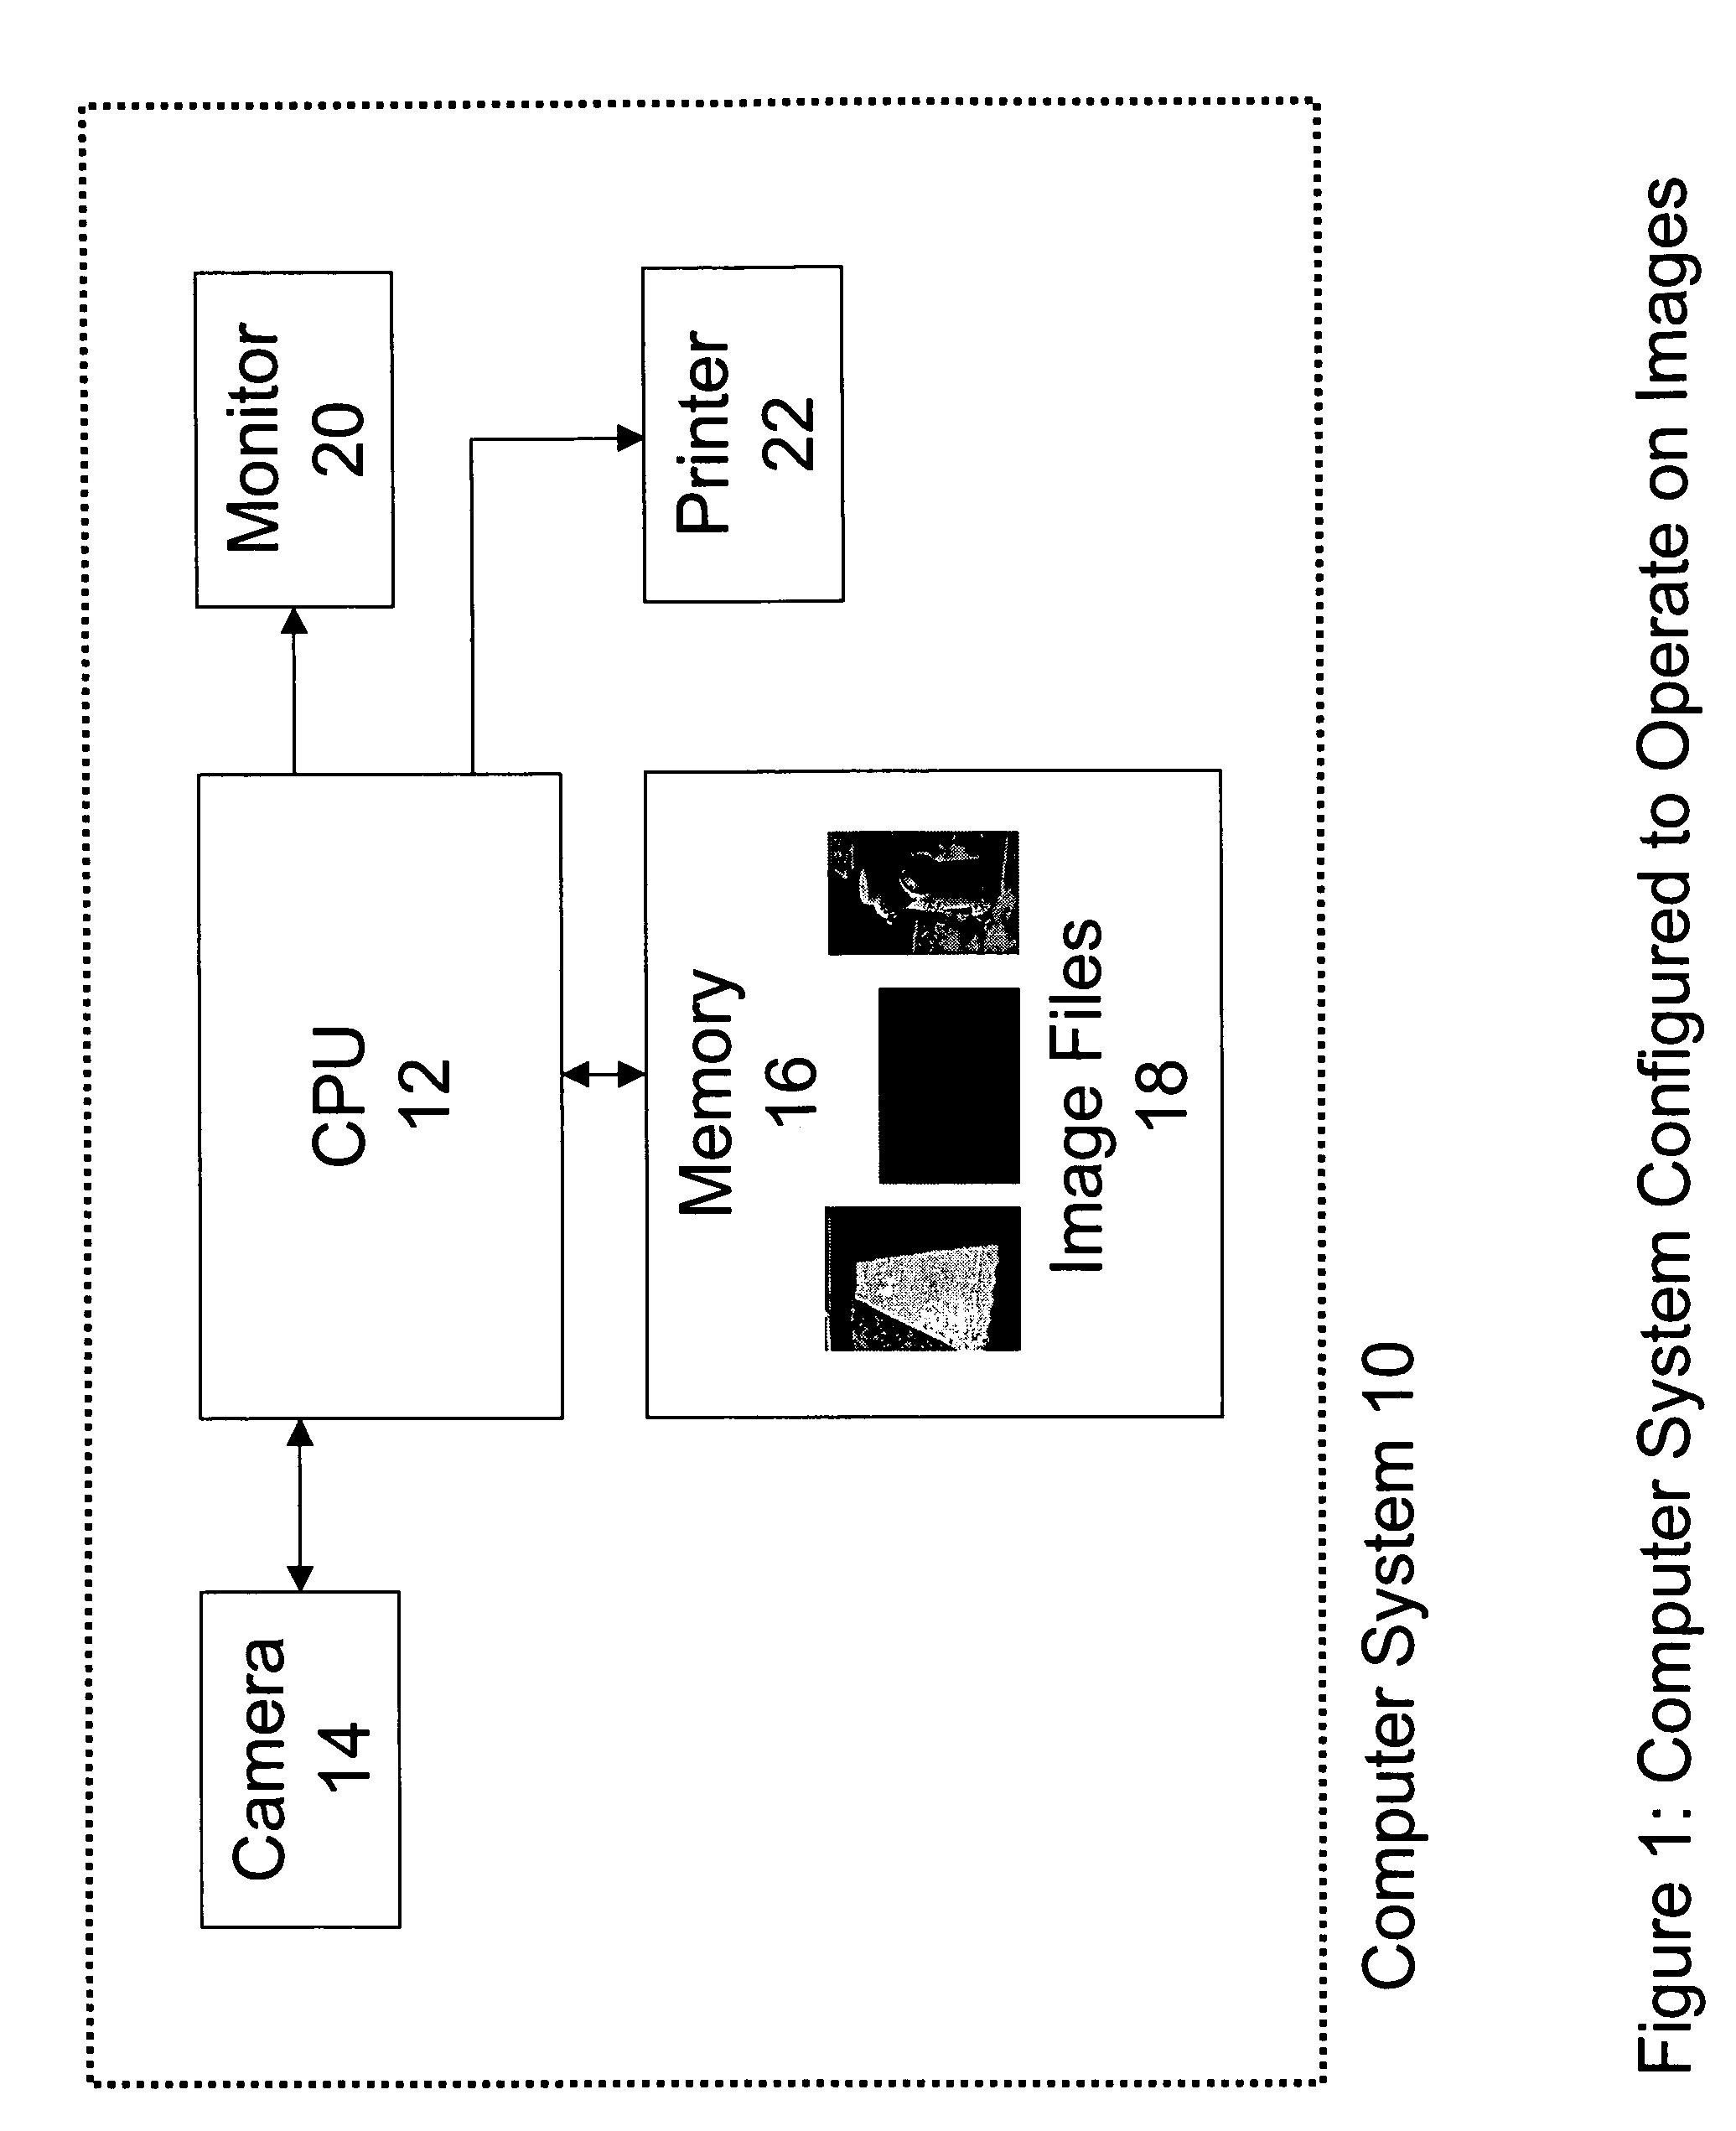 Method and system for identifying illumination flux in an image